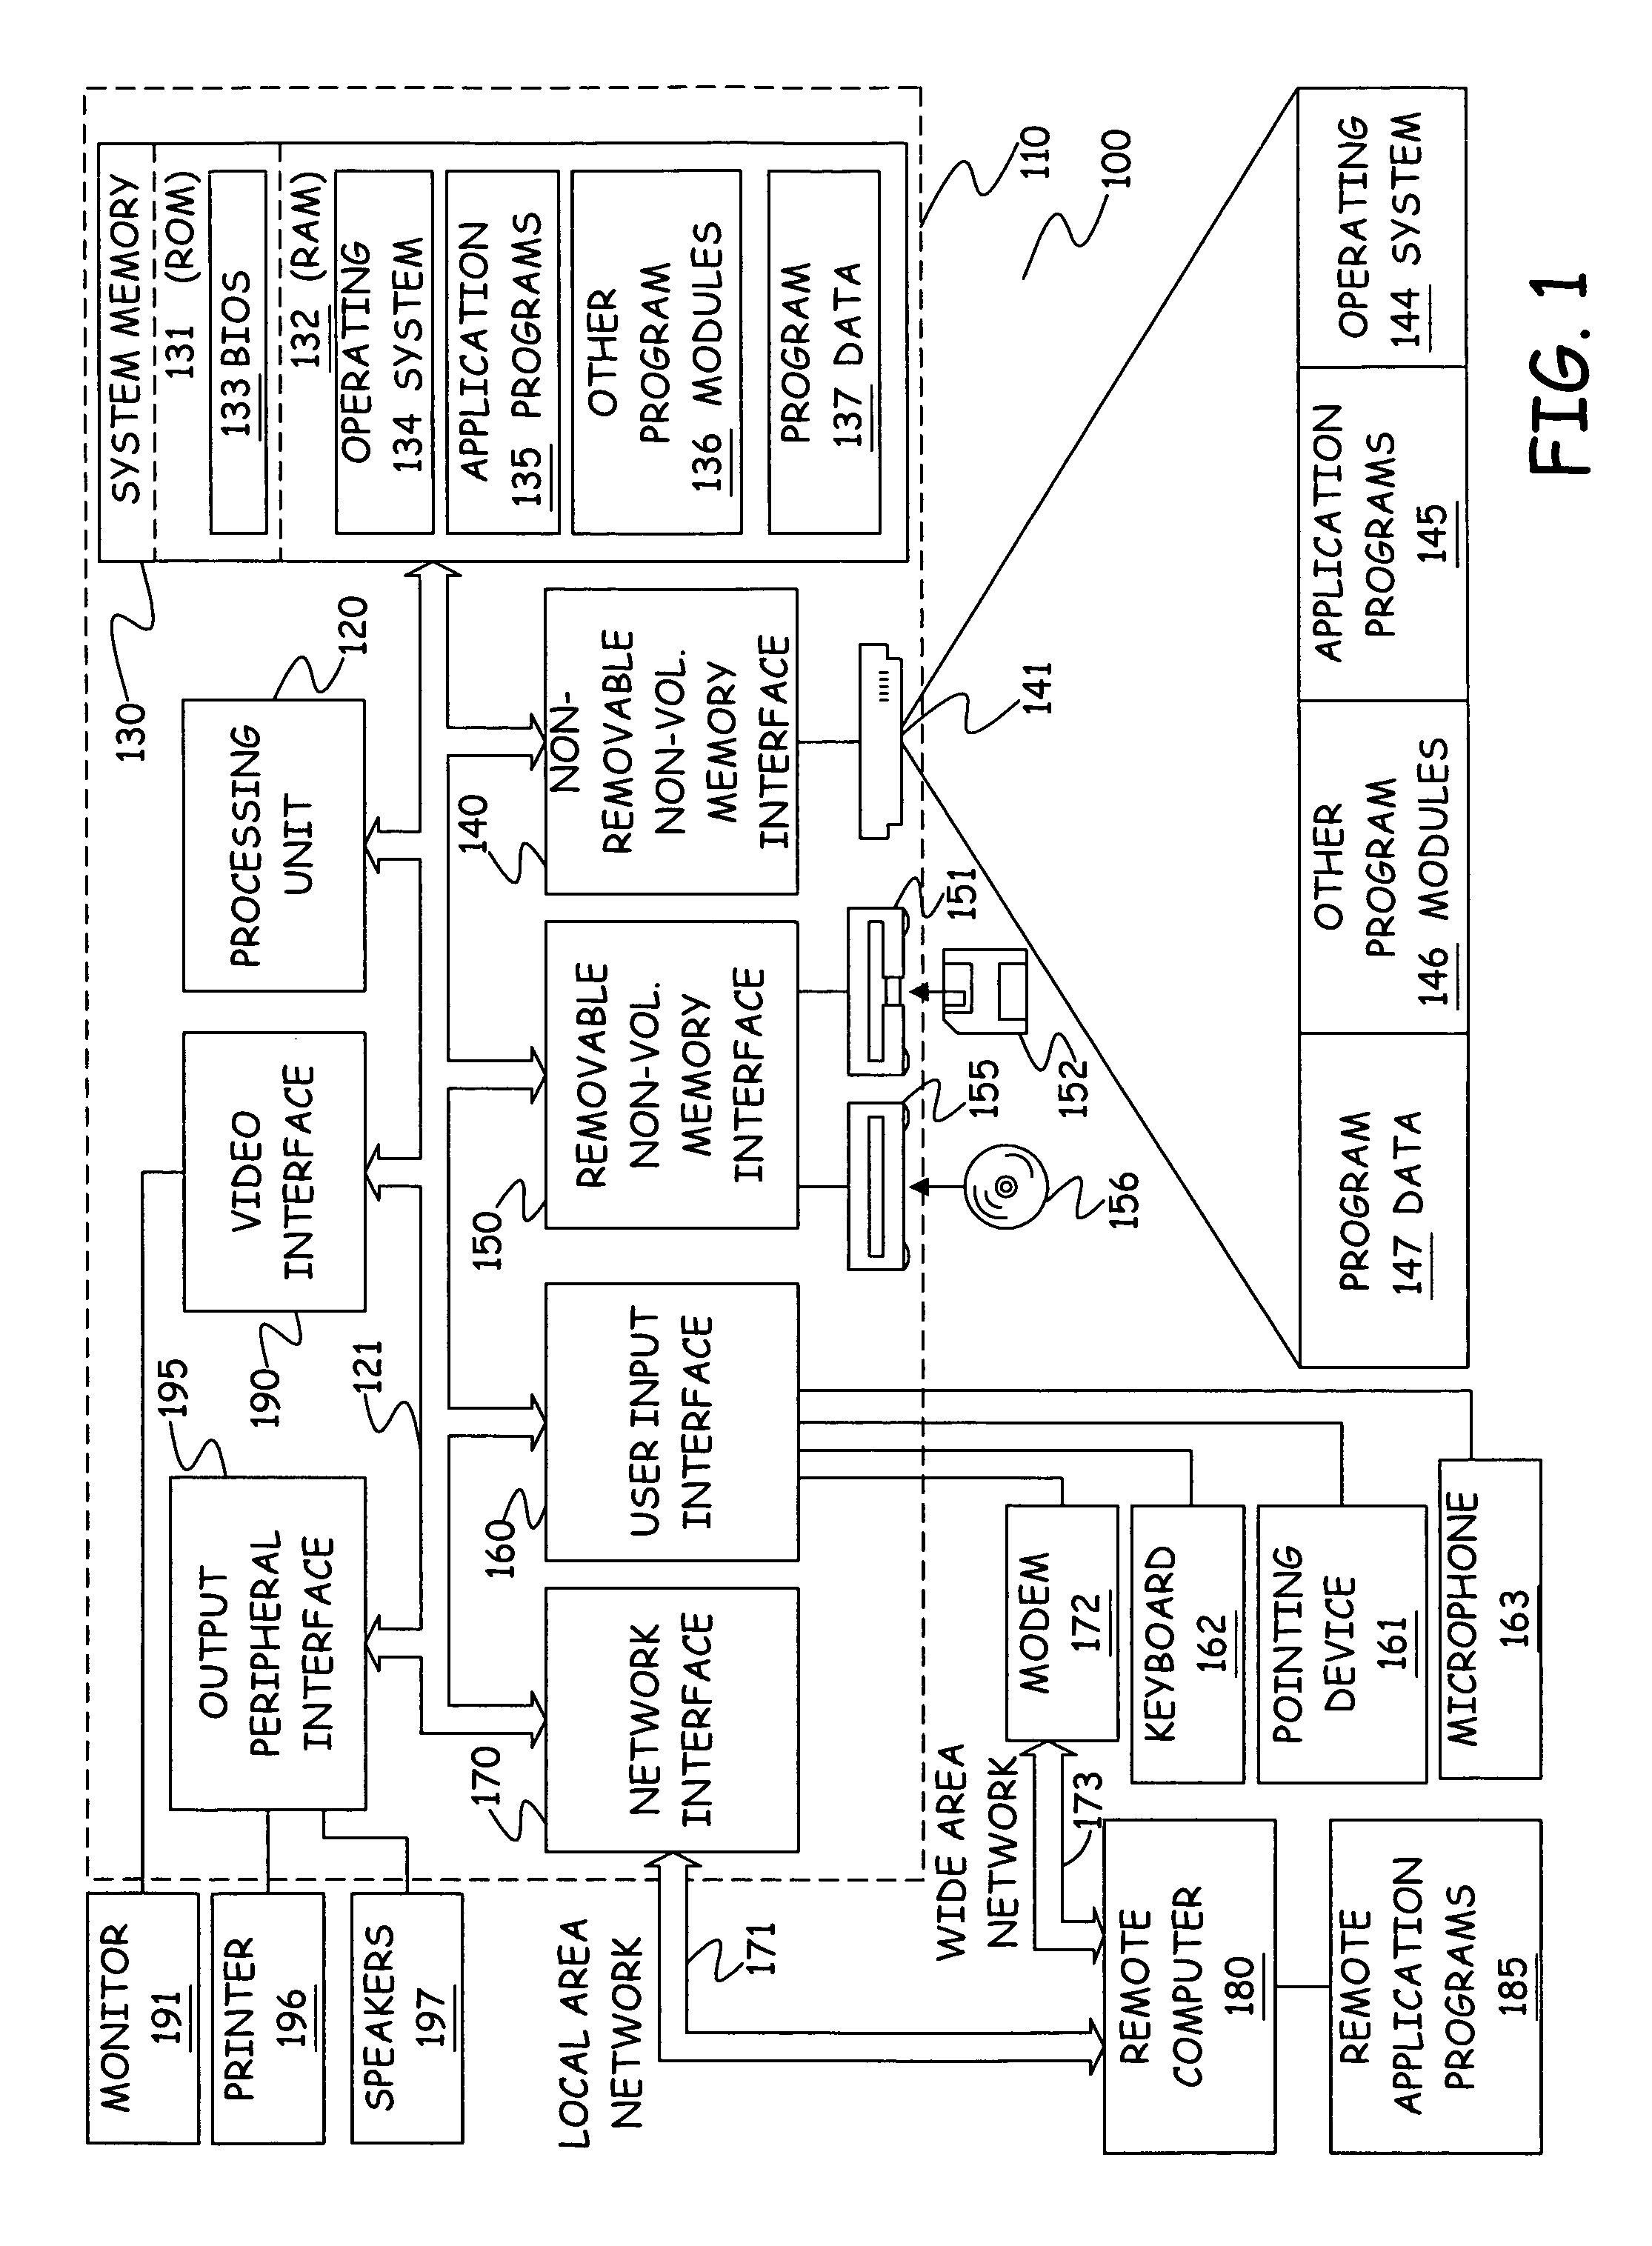 Test display module for testing application logic independent of specific user interface platforms